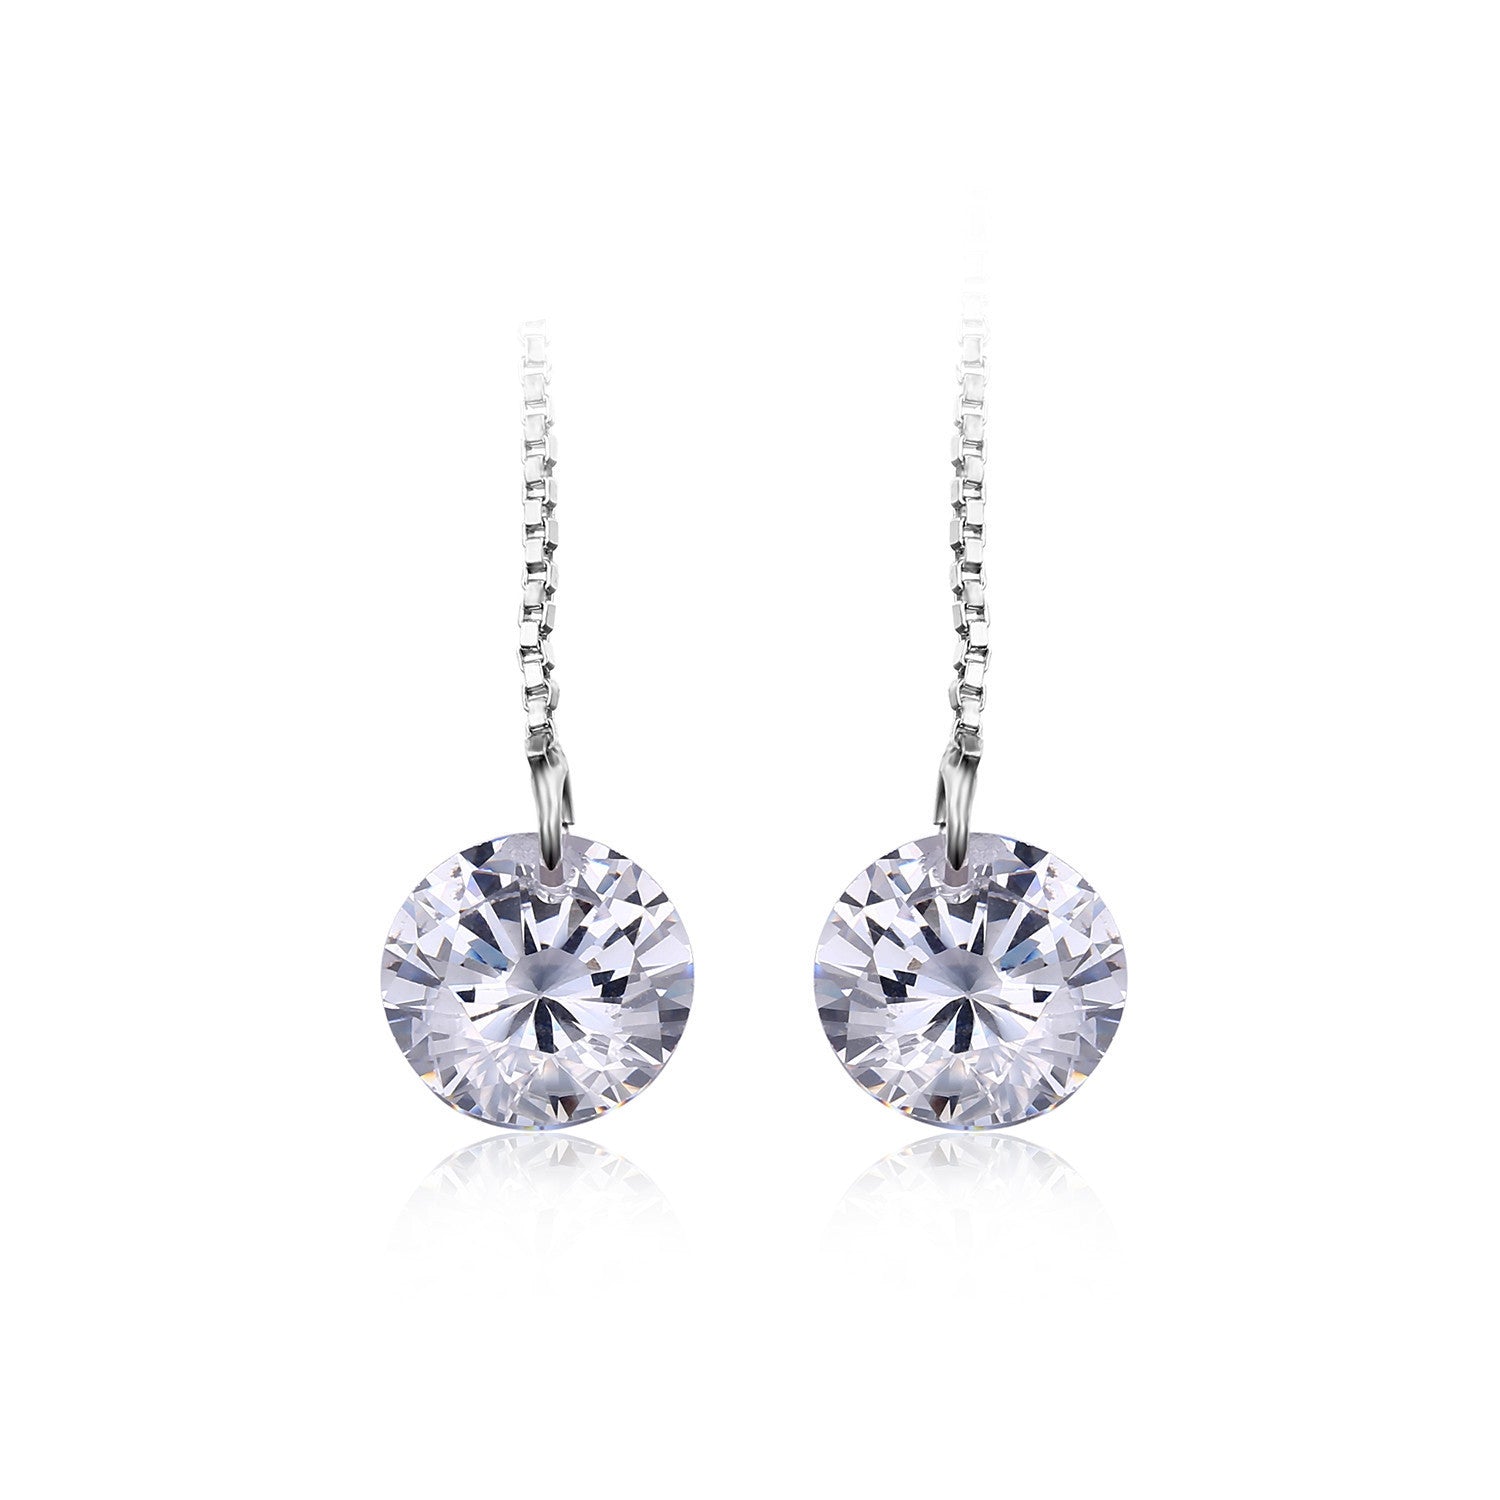 925 Sterling Silver 6.4ct AAA Cubic Zirconia Long Earrings For Women 8*8mm Round Fashion Earrings Accessories - CelebritystyleFashion.com.au online clothing shop australia